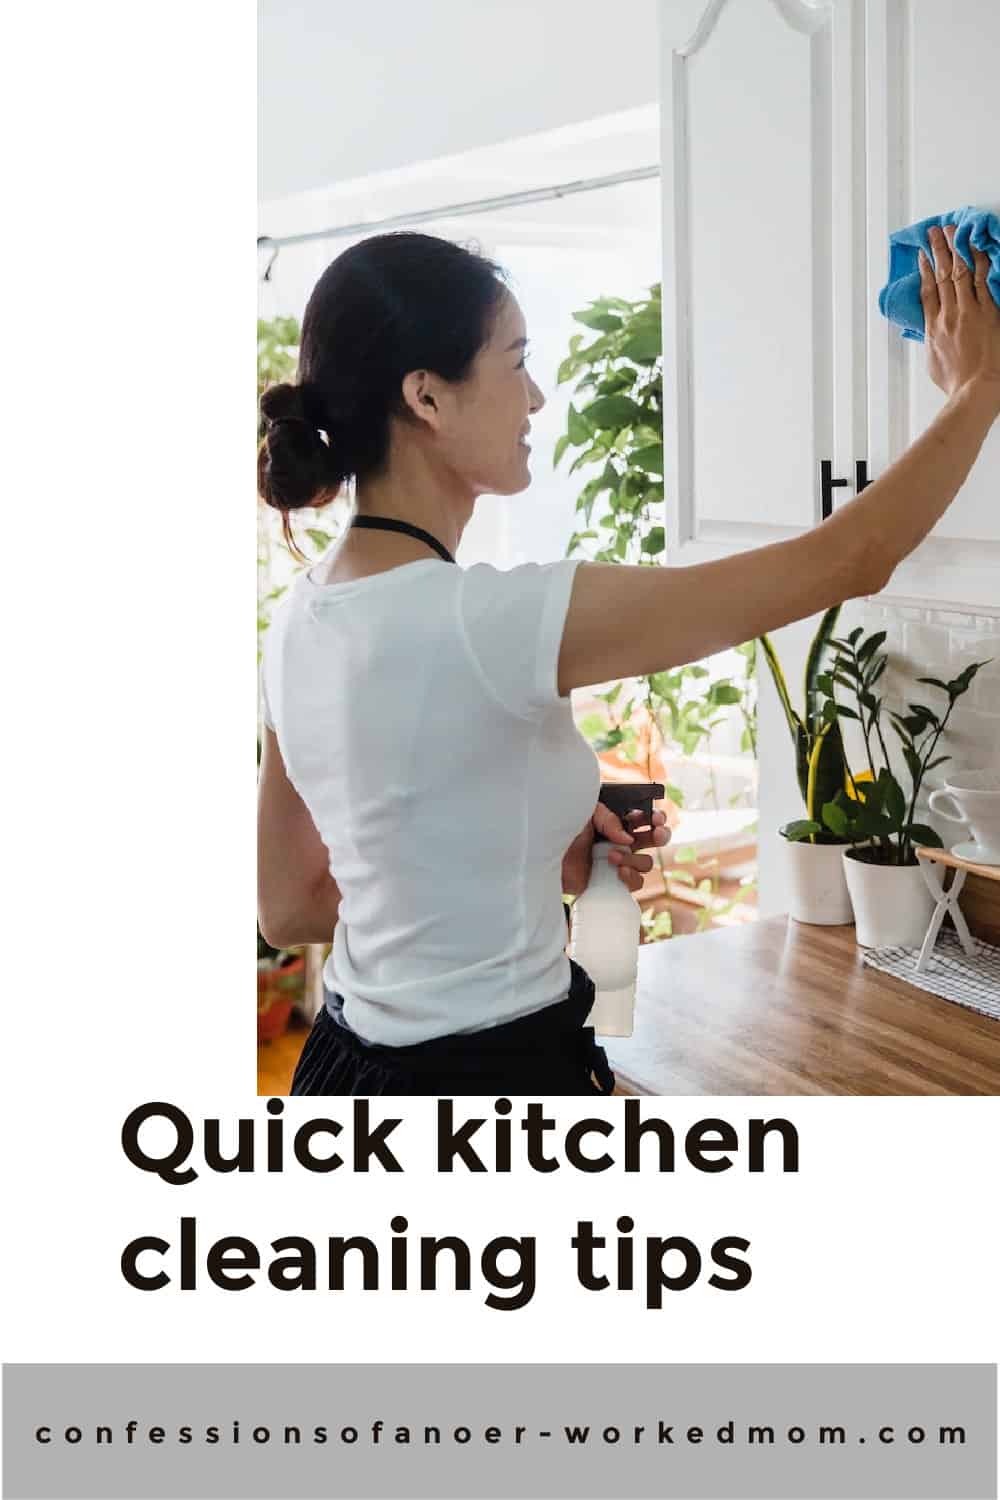 I'm sharing these quick kitchen cleaning tips with you because spending time cleaning is probably one of my least favorite things to do. Keep reading to learn more.